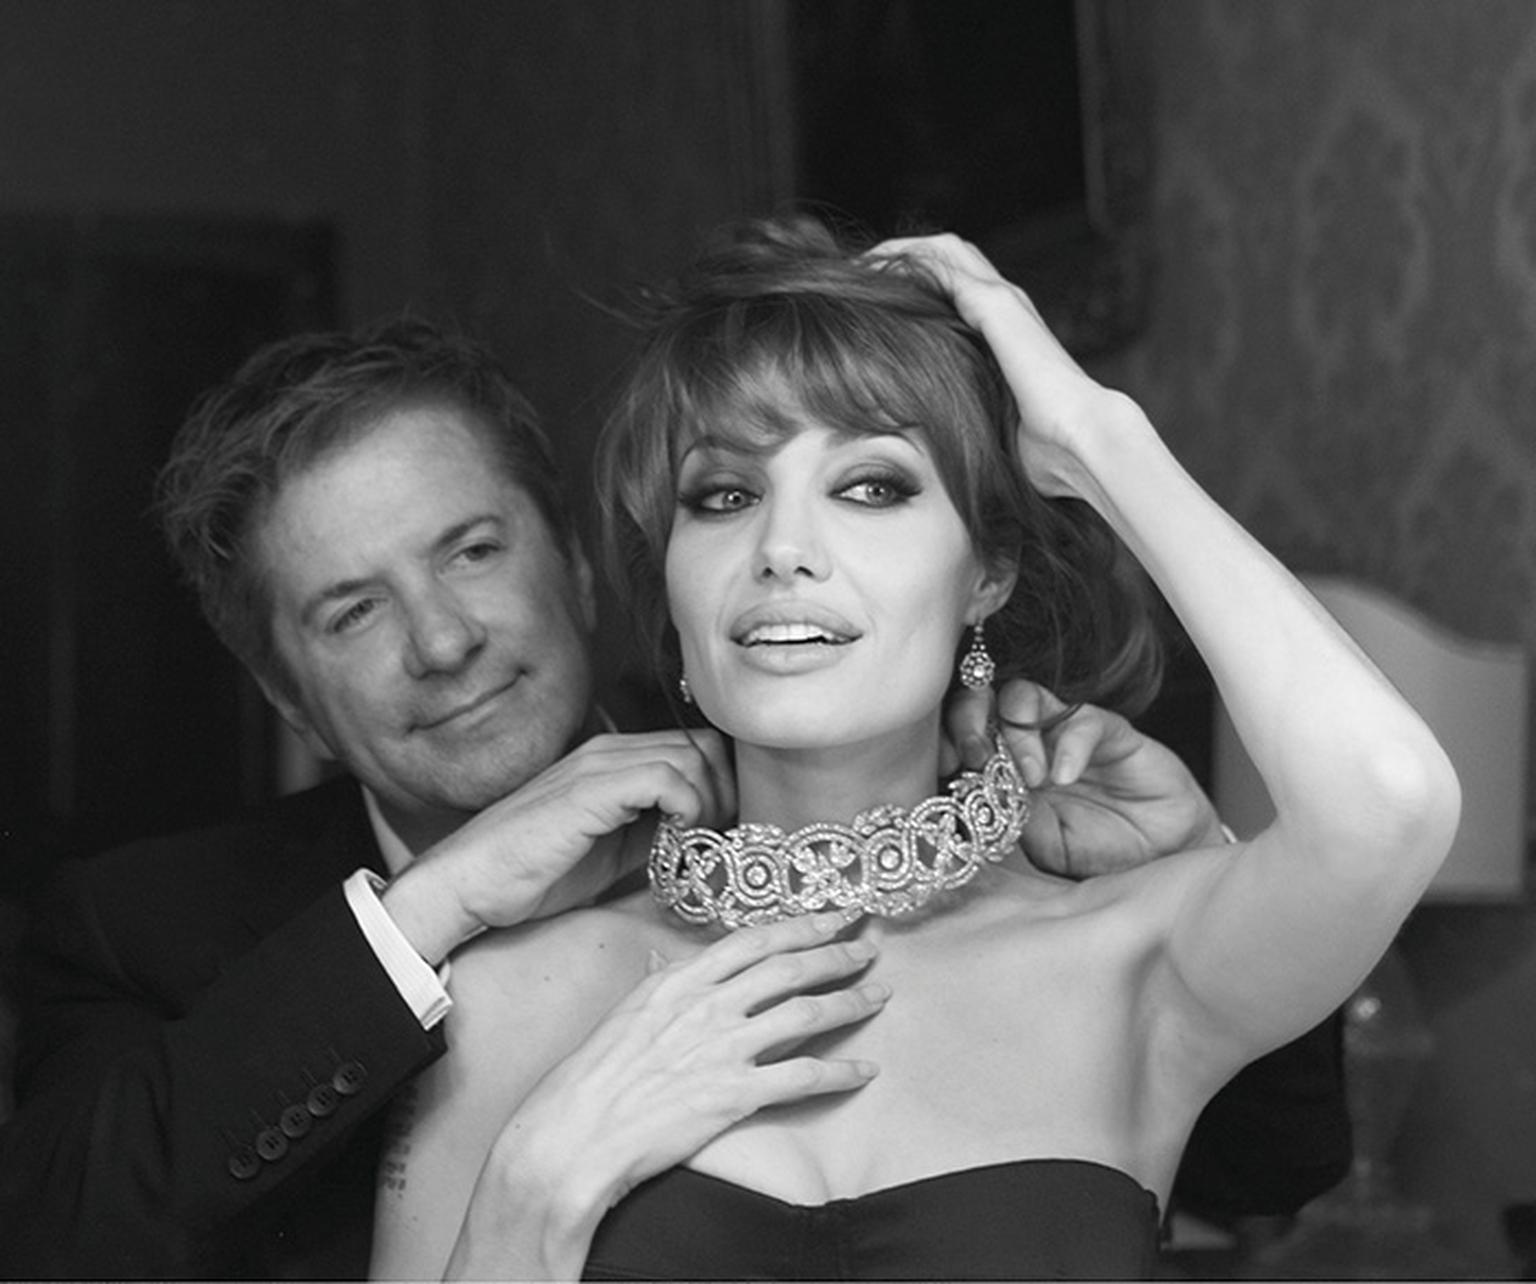 Photographer-Patrick-Demarchelier-captures-Angelina-Jolie-and-Robert-Procop-on-the-set-of-The-Tourist.-Photo-credit-Patrick-Demarchelier.jpg